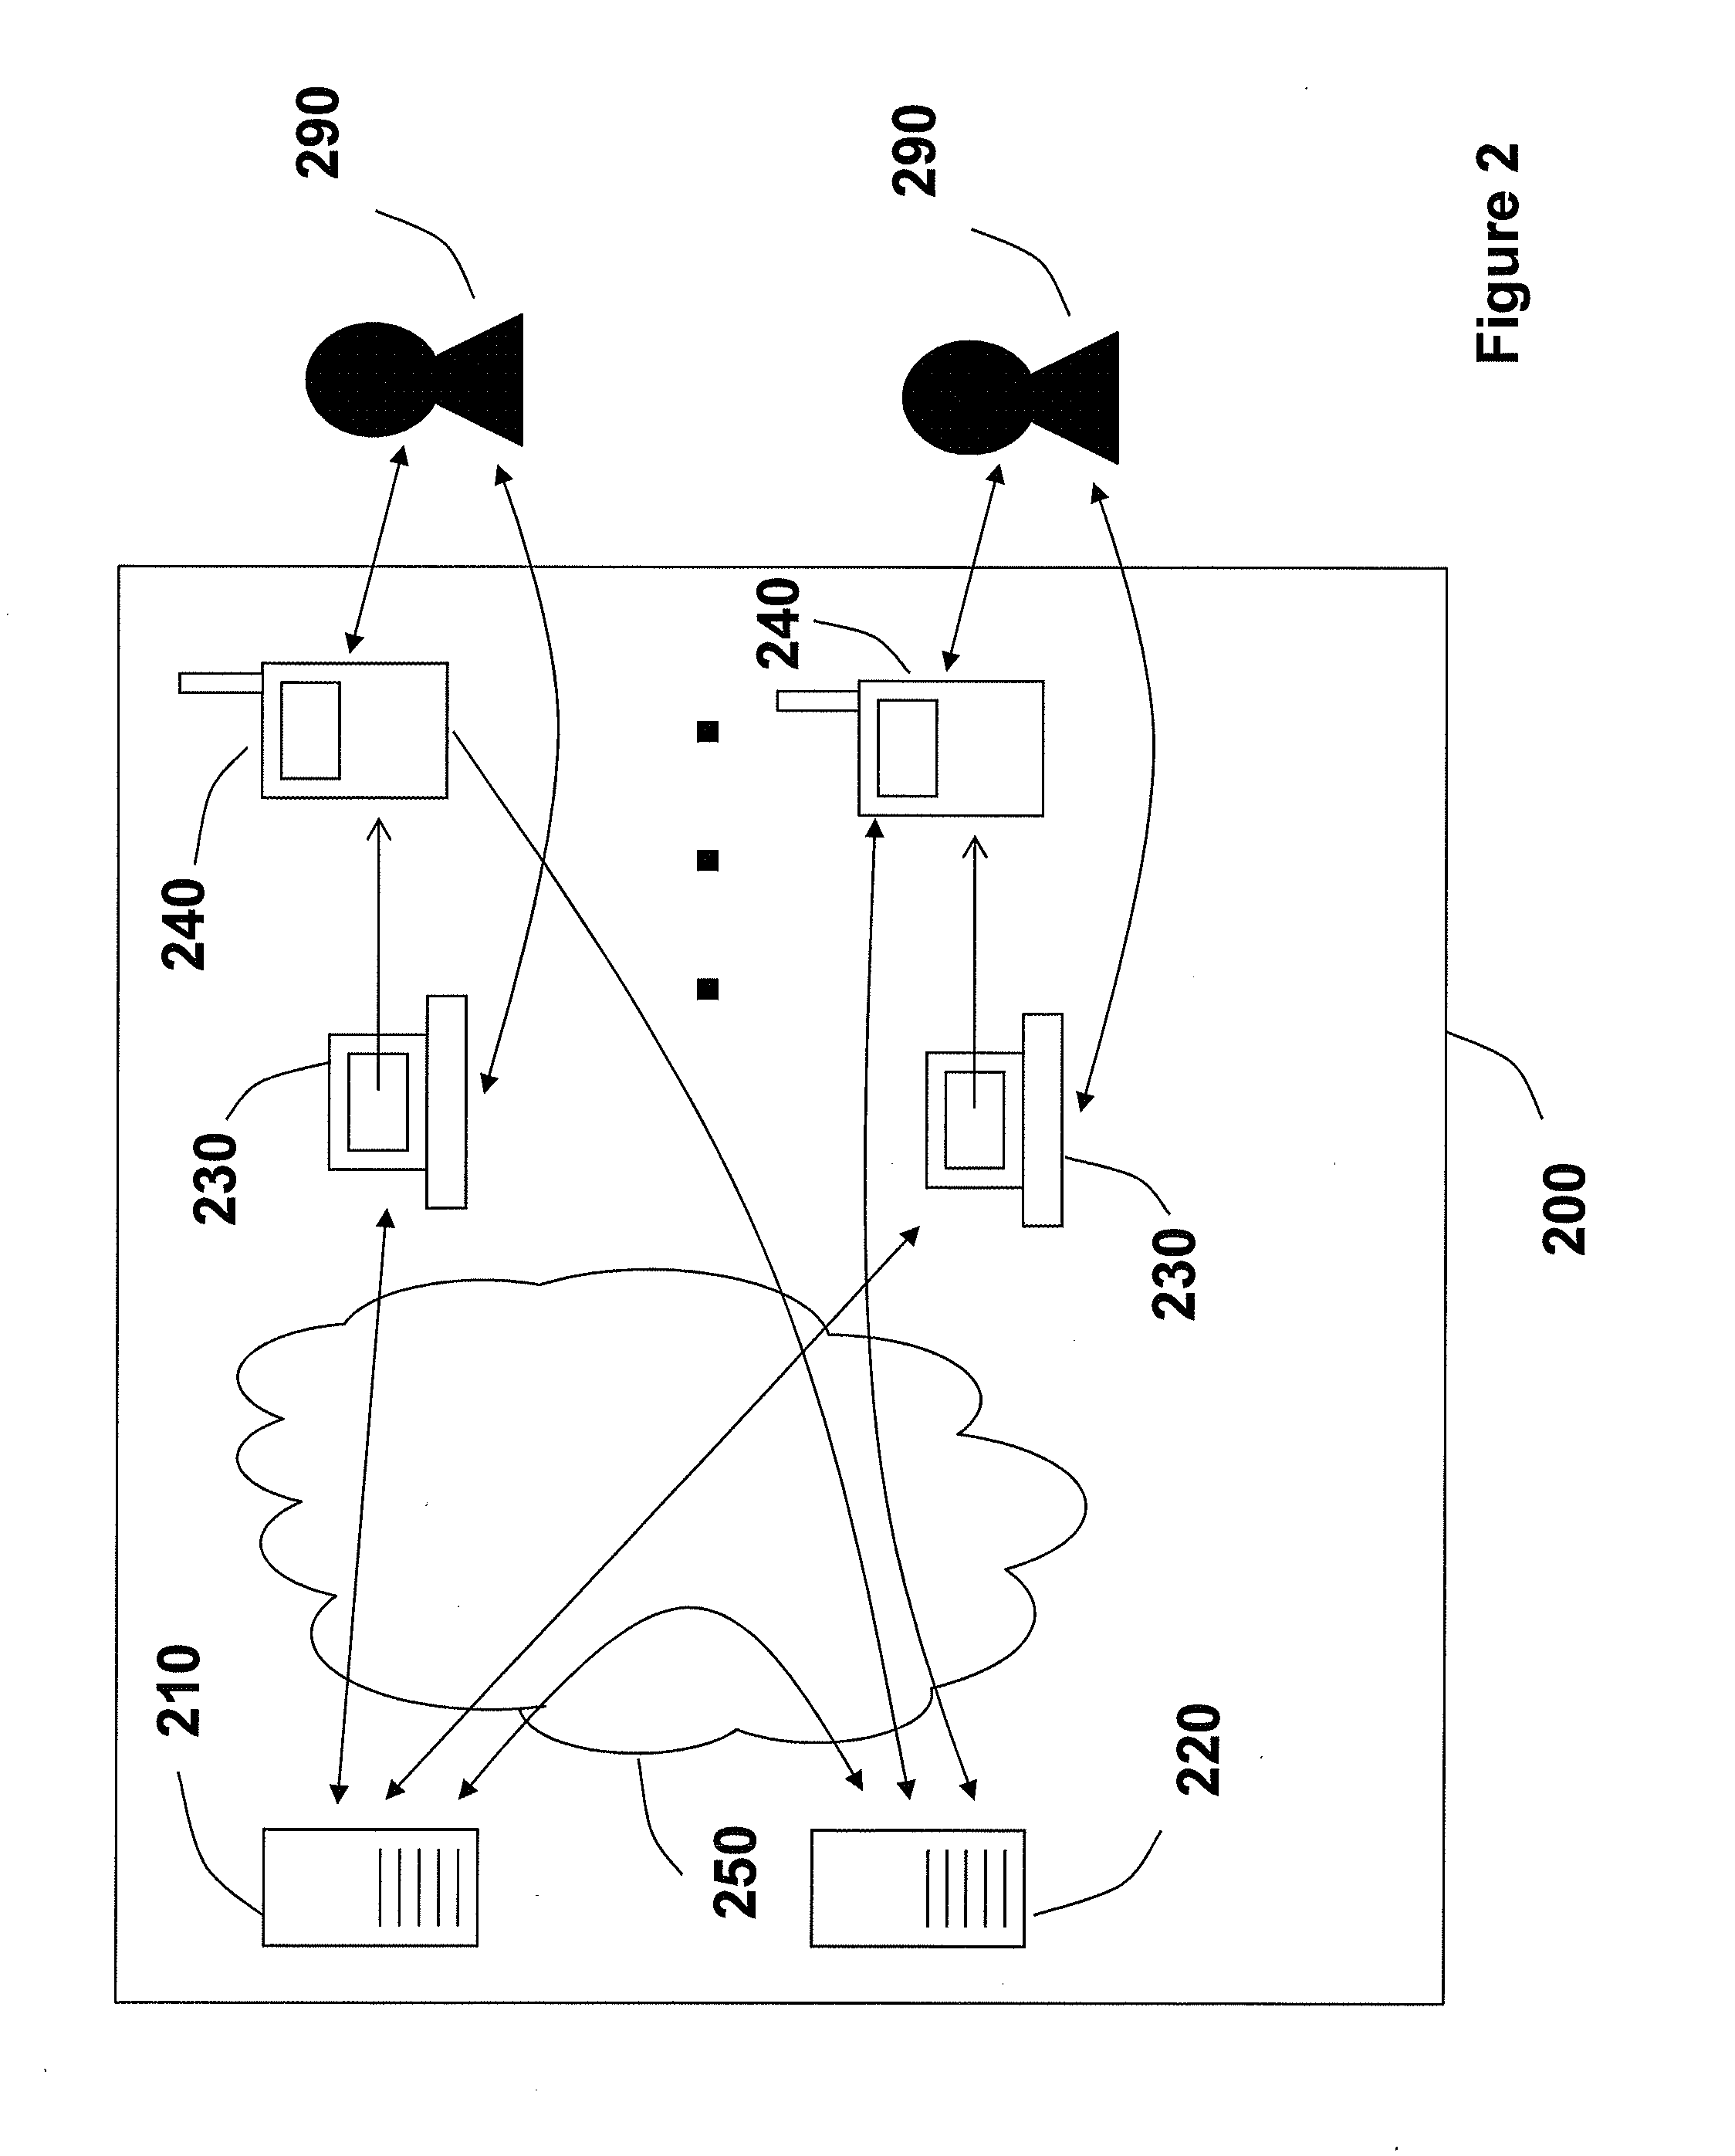 User-convenient authentication method and apparatus using a mobile authentication application